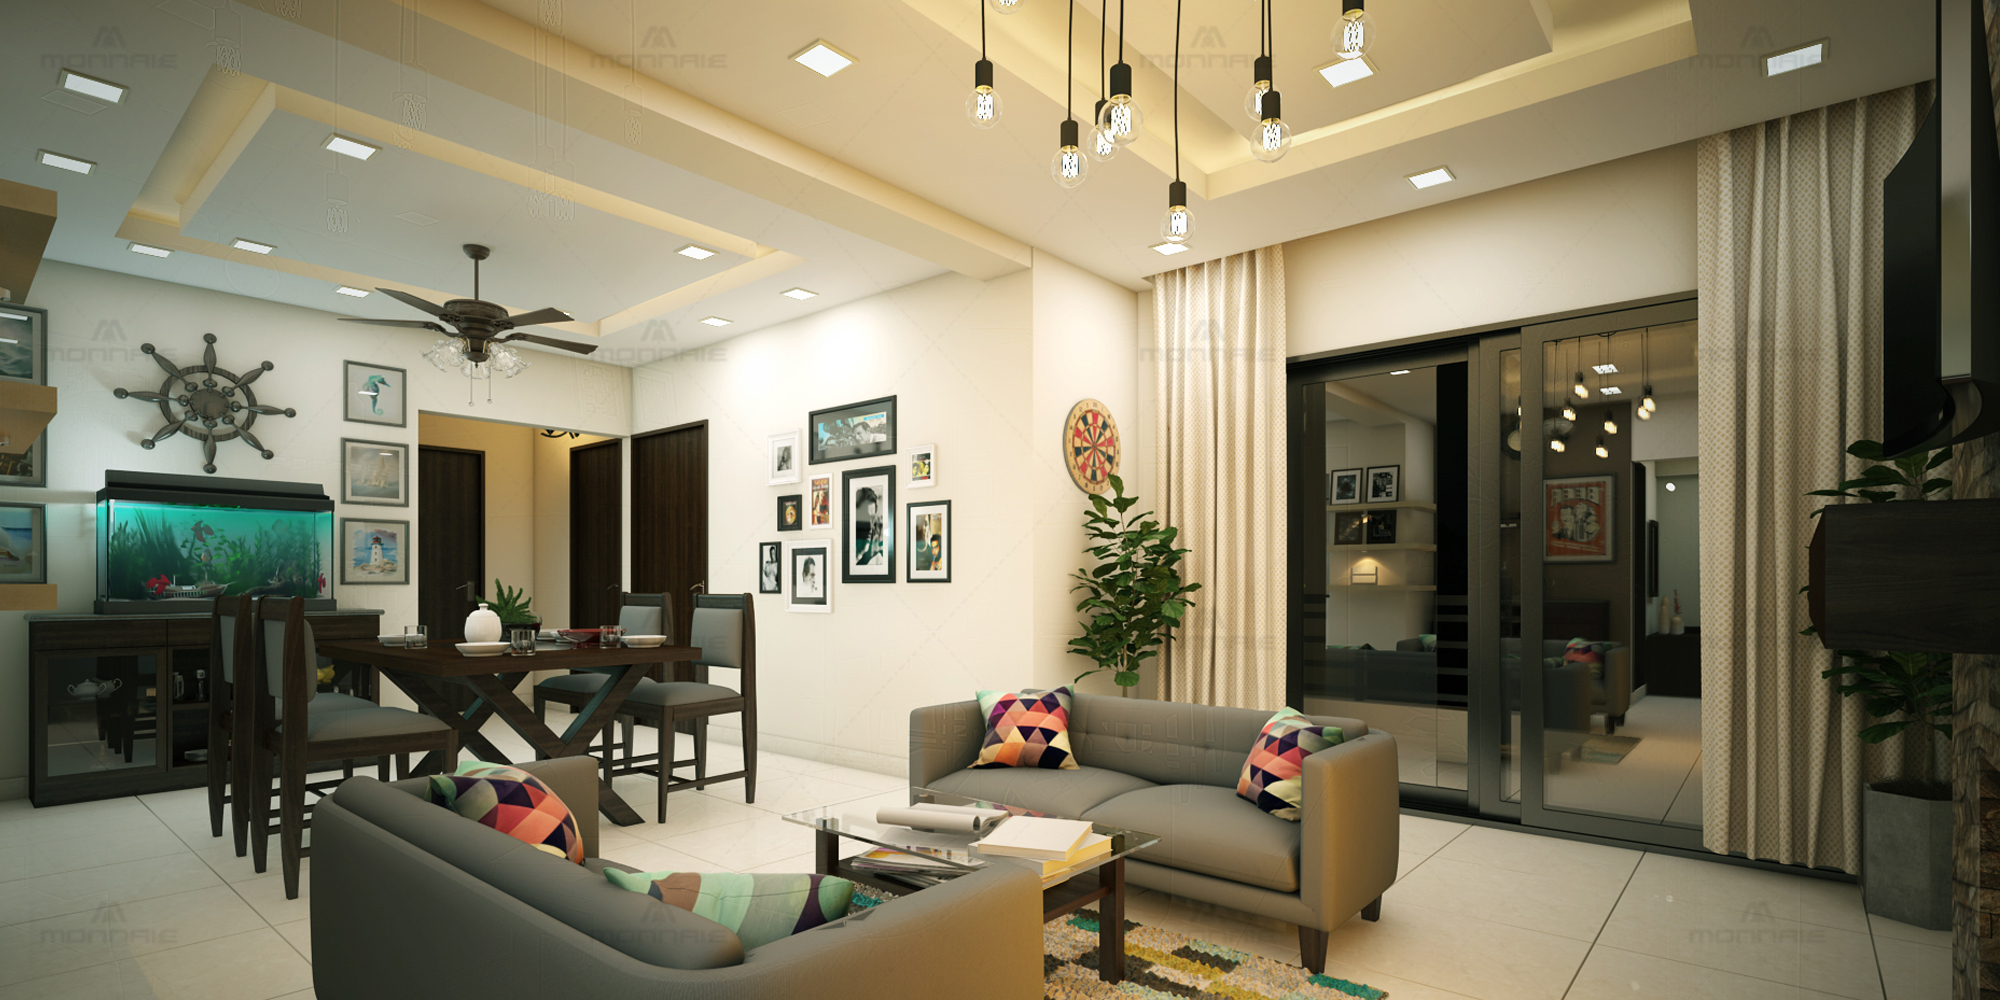 kerala home interior designers - Monnaie architects and interiors